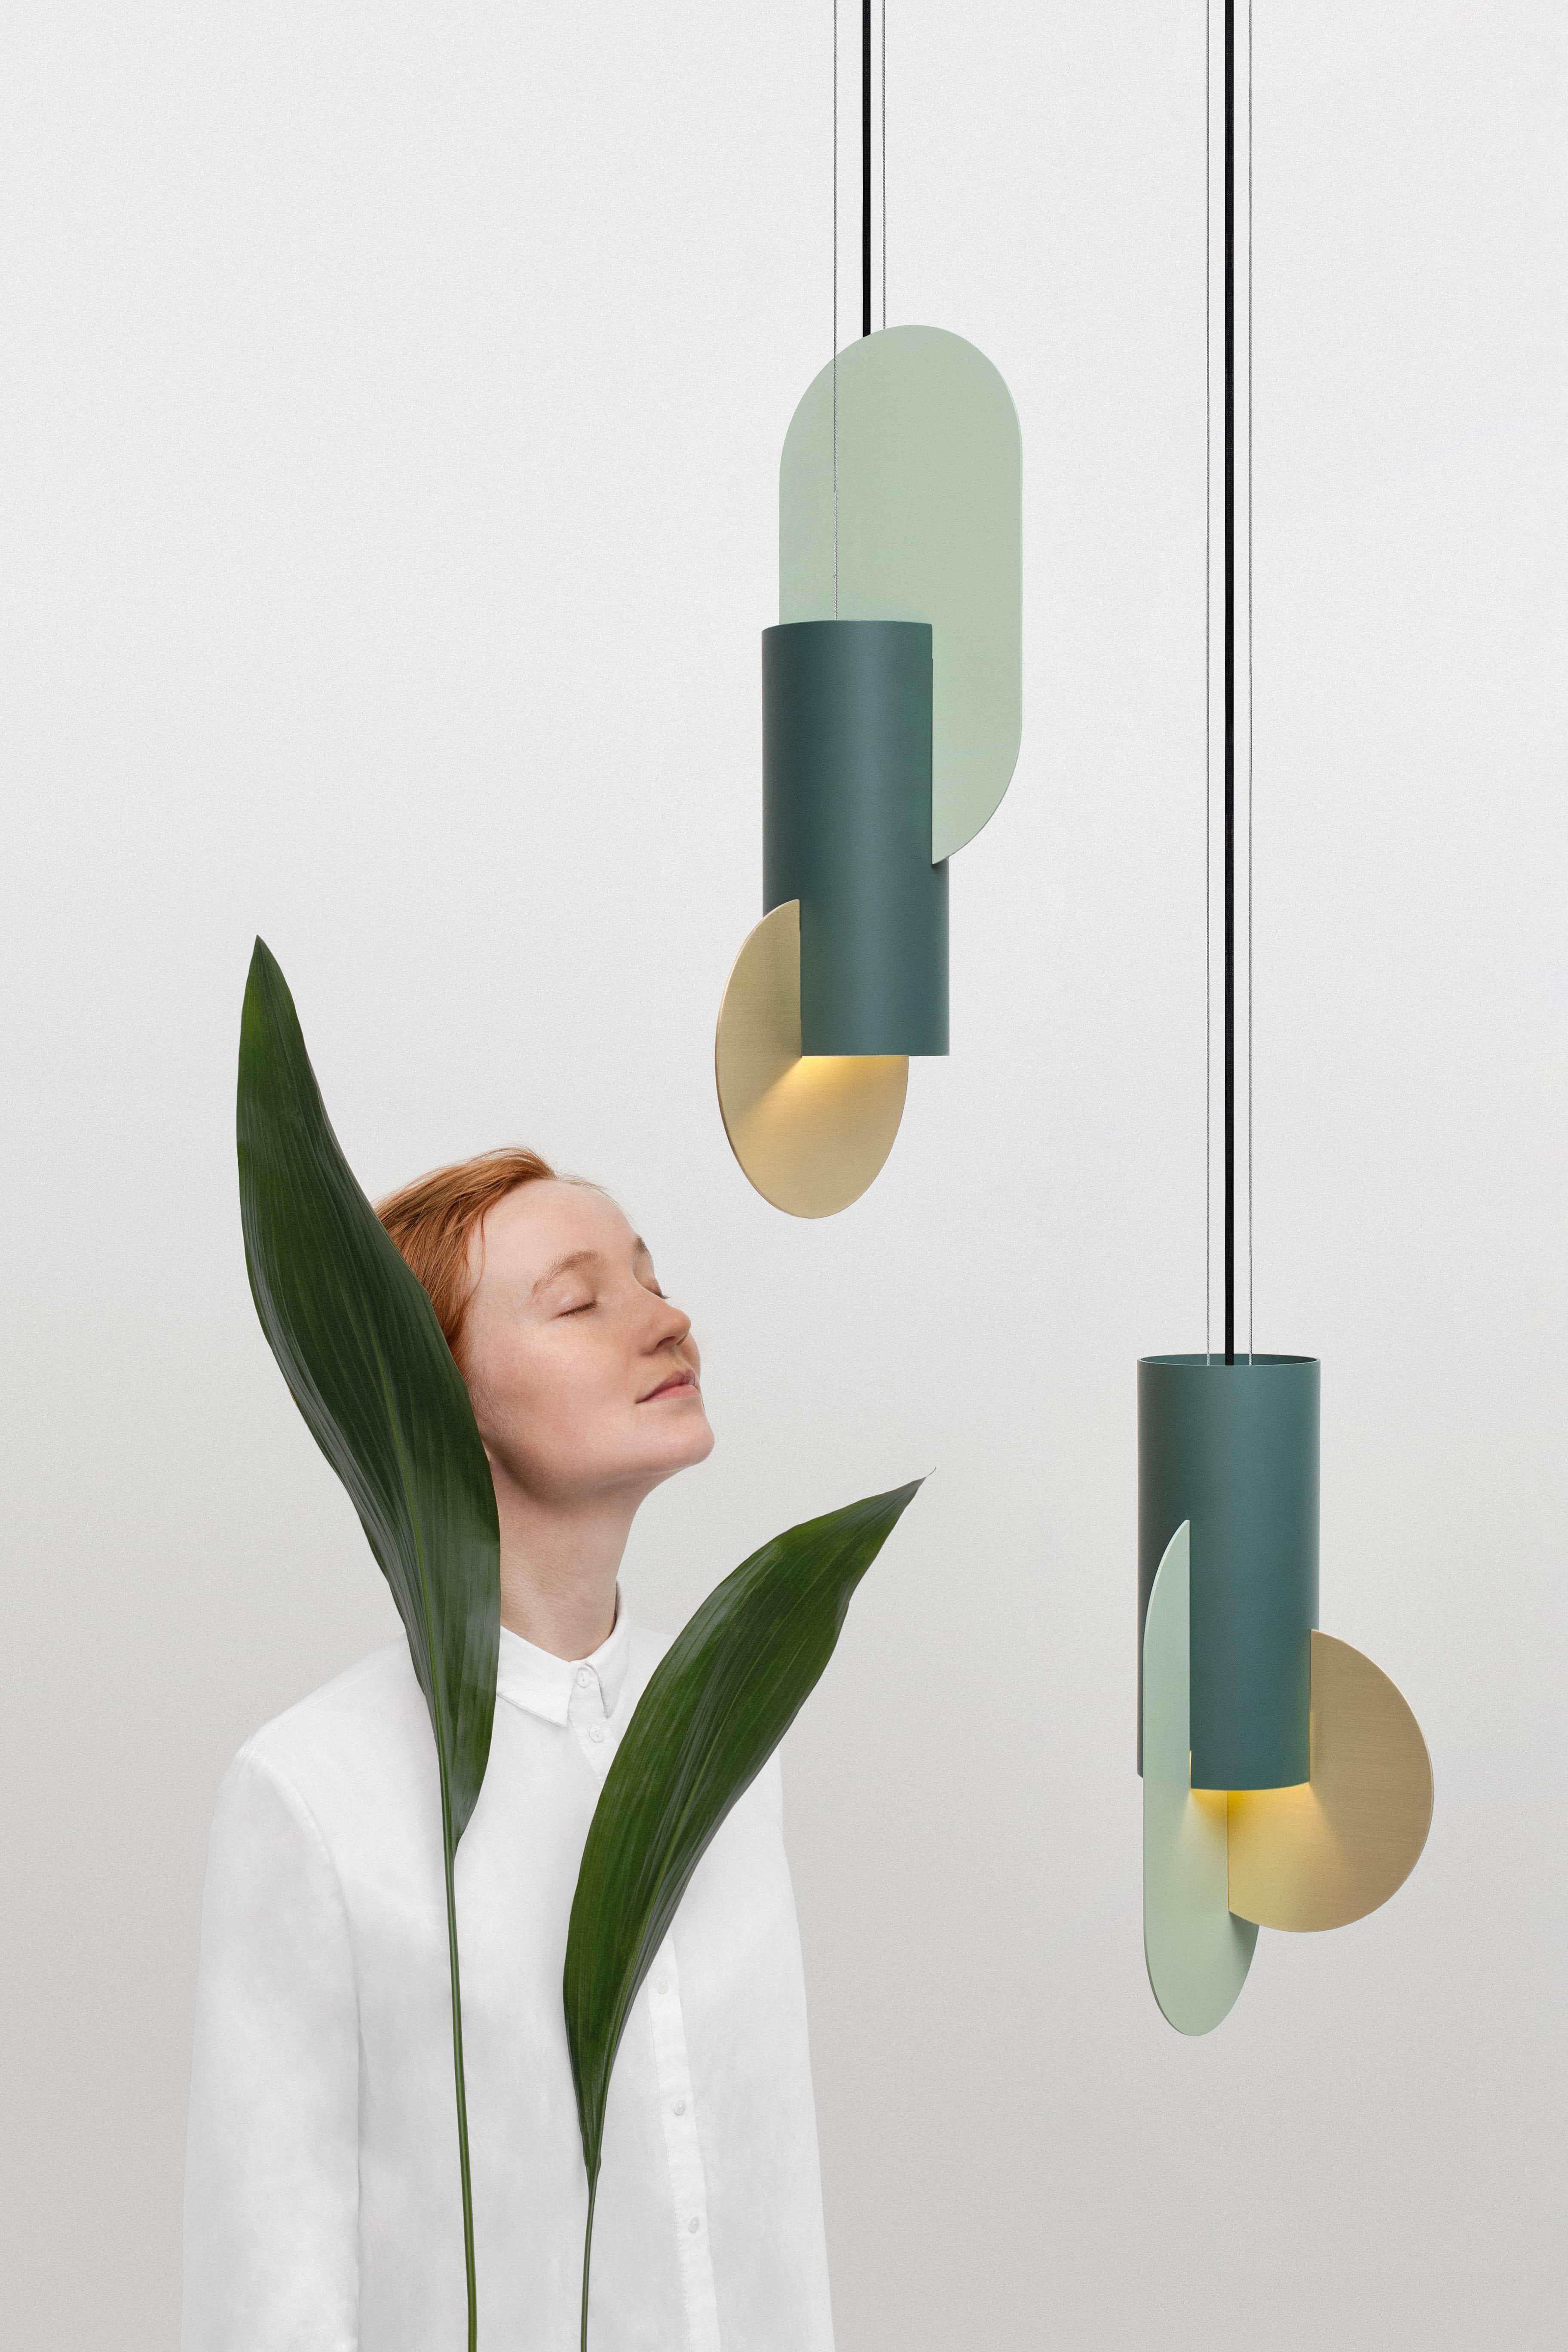 Suprematic lighting collection inspired by the geometric works of the great Suprematist Kazimir Malevich.
Suprematism is a modernist movement in the art of the early 20th century, focused on the basic geometric forms, such as circles, squares, lines